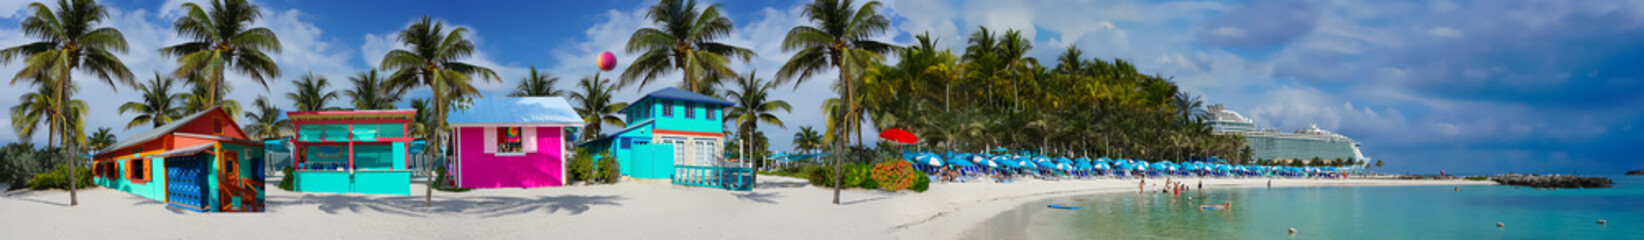 Collage about Cococay island at Caribbean sea